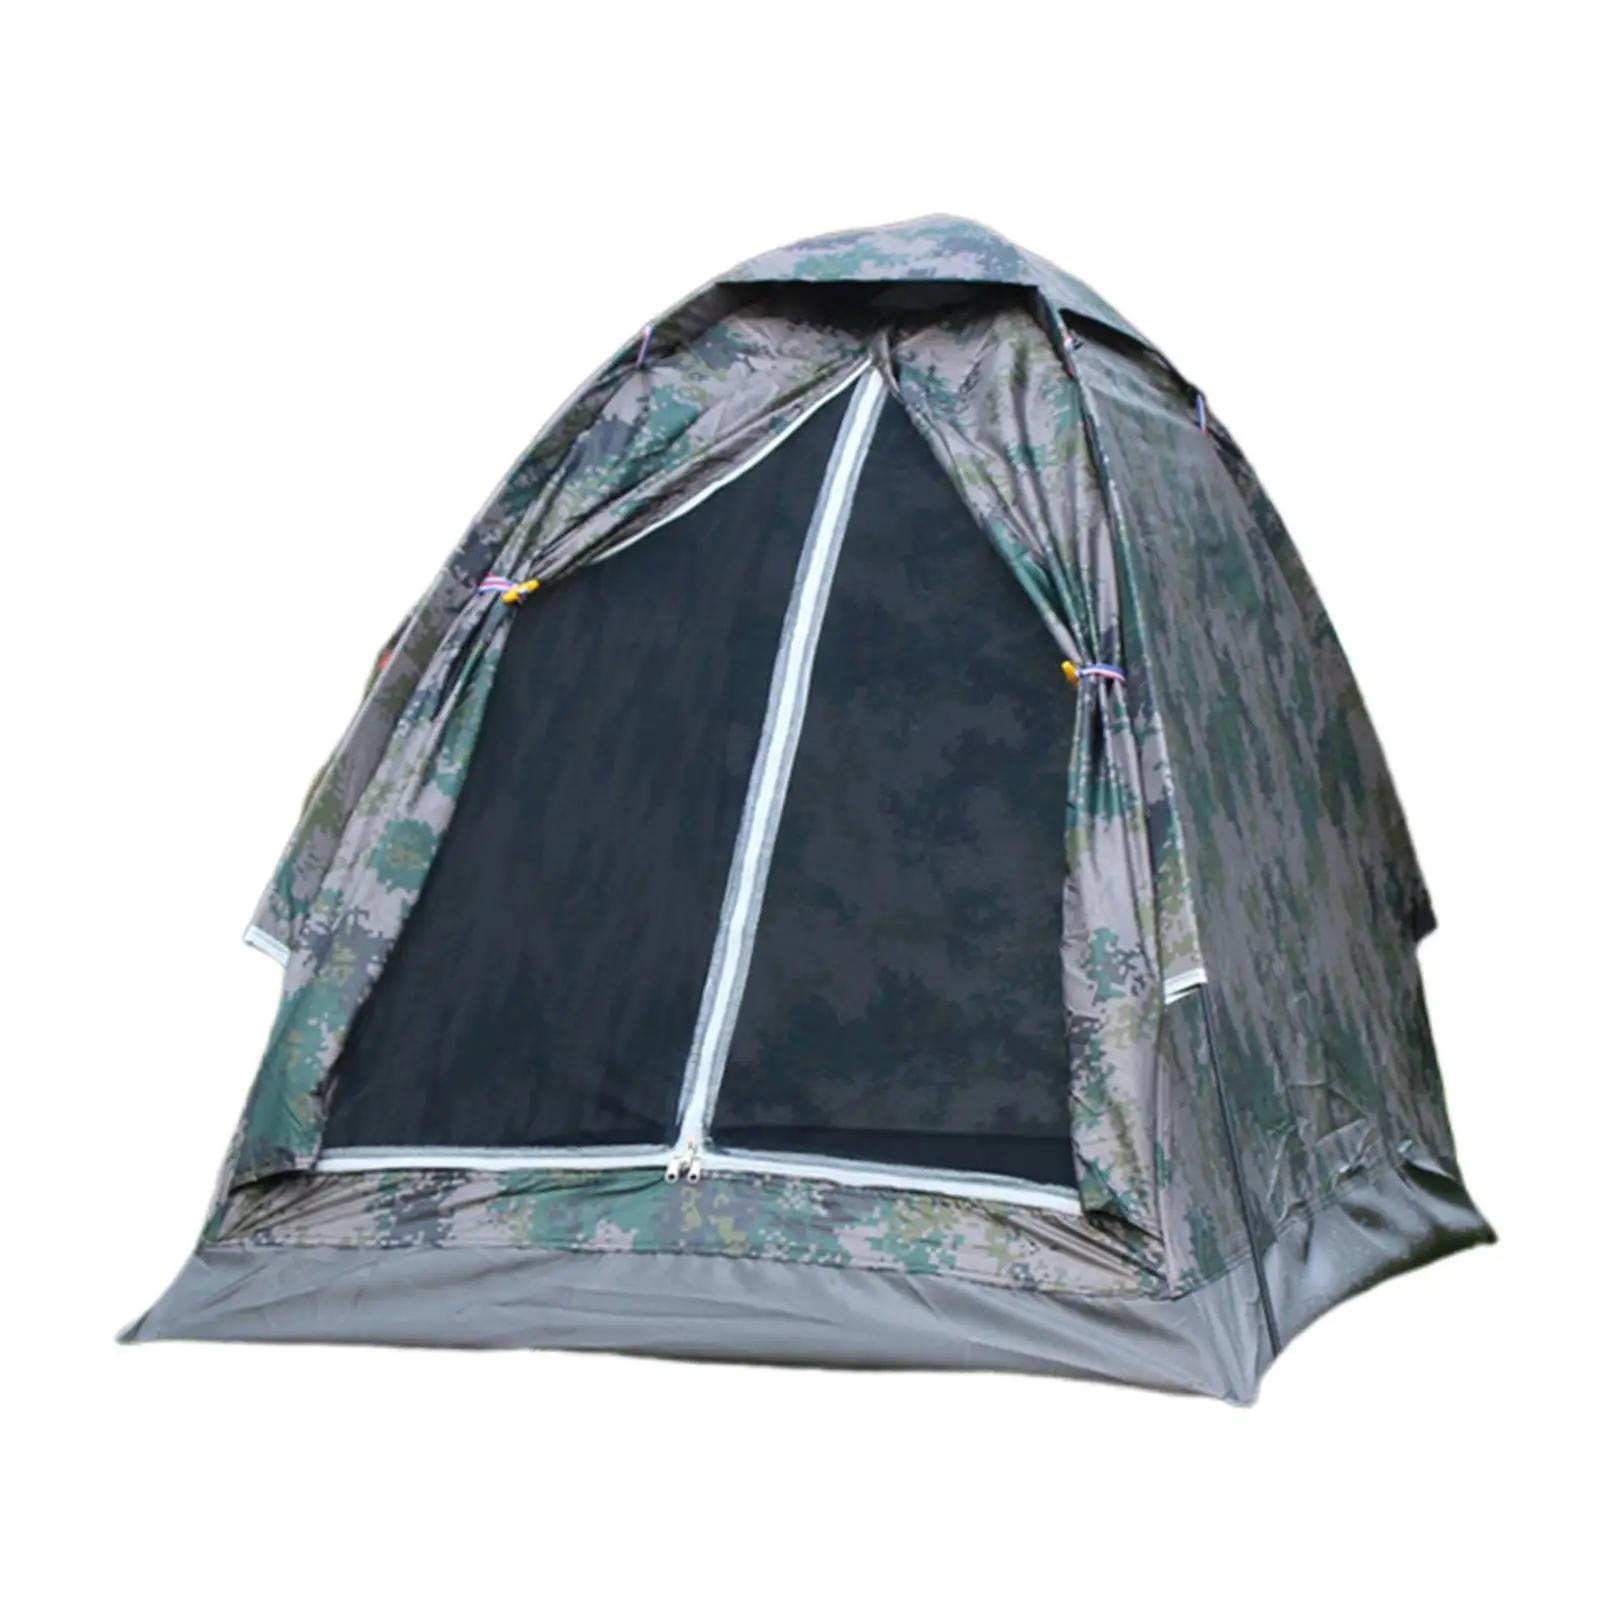 Portable Outdoor Camping Tent Camouflage 1/2 Person Tent Double Layer Waterproof Outdoor Hiking Traveling Camping Picnic Tent